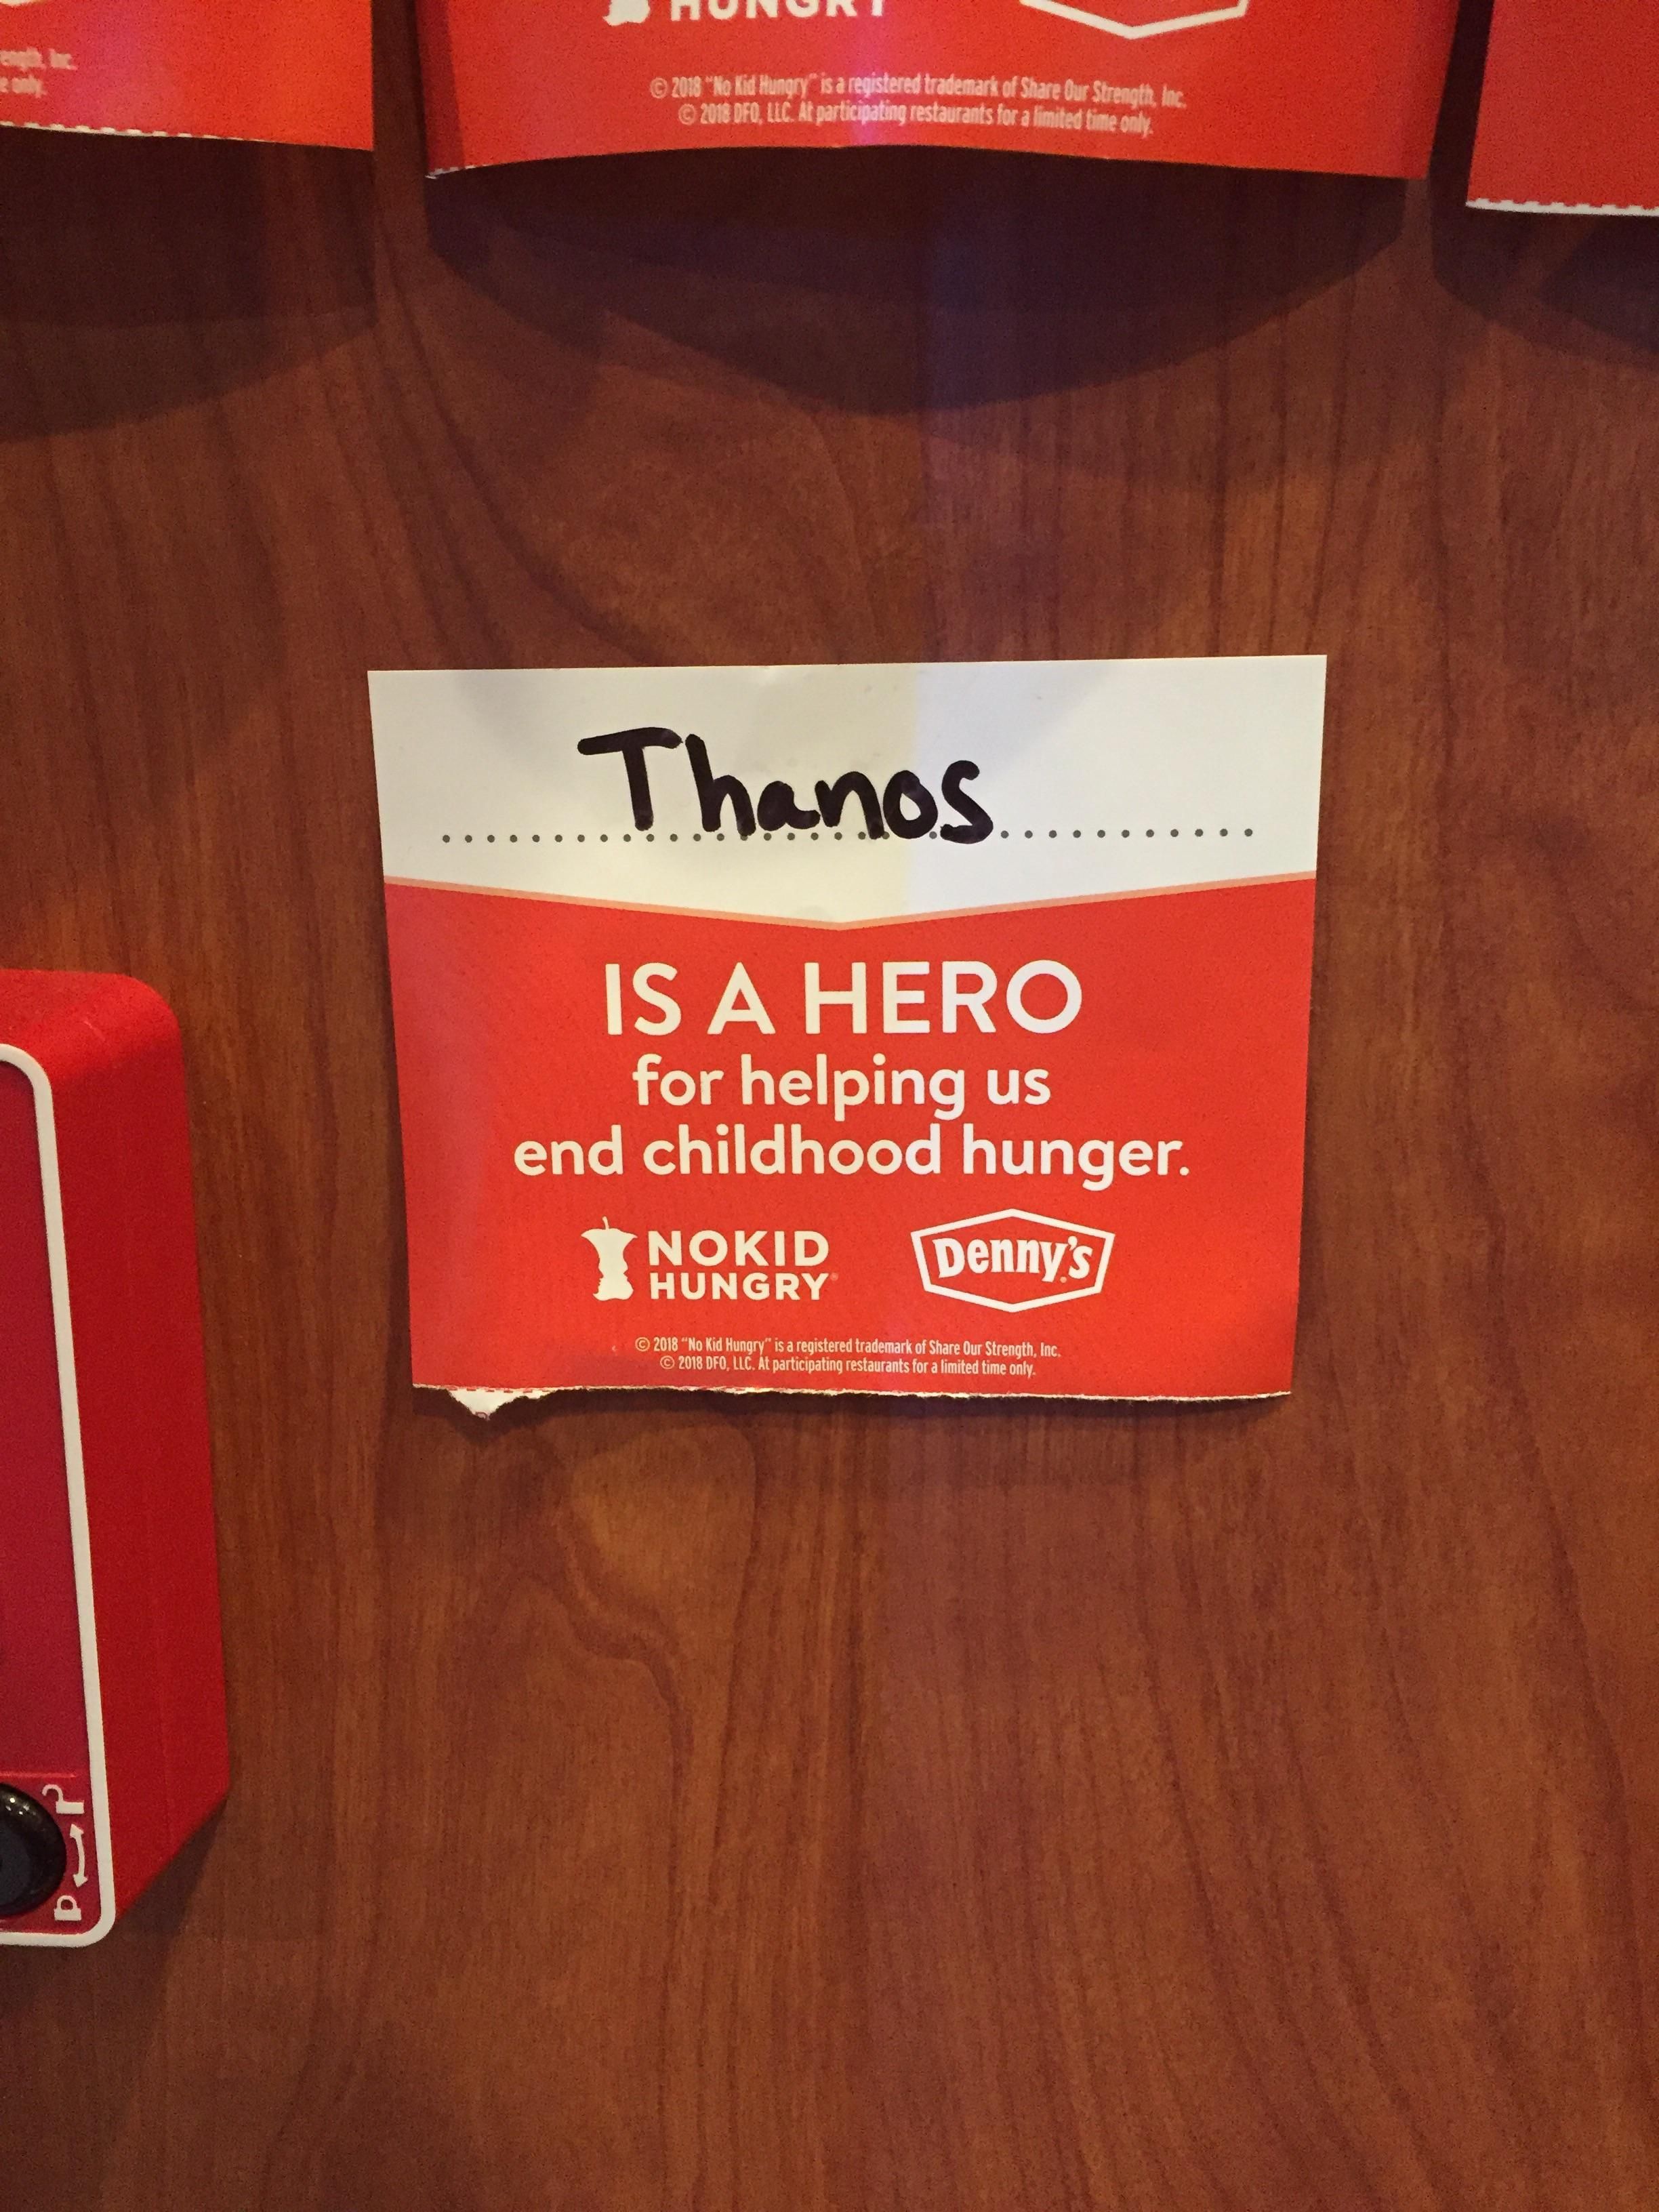 Found this at my local Denny's